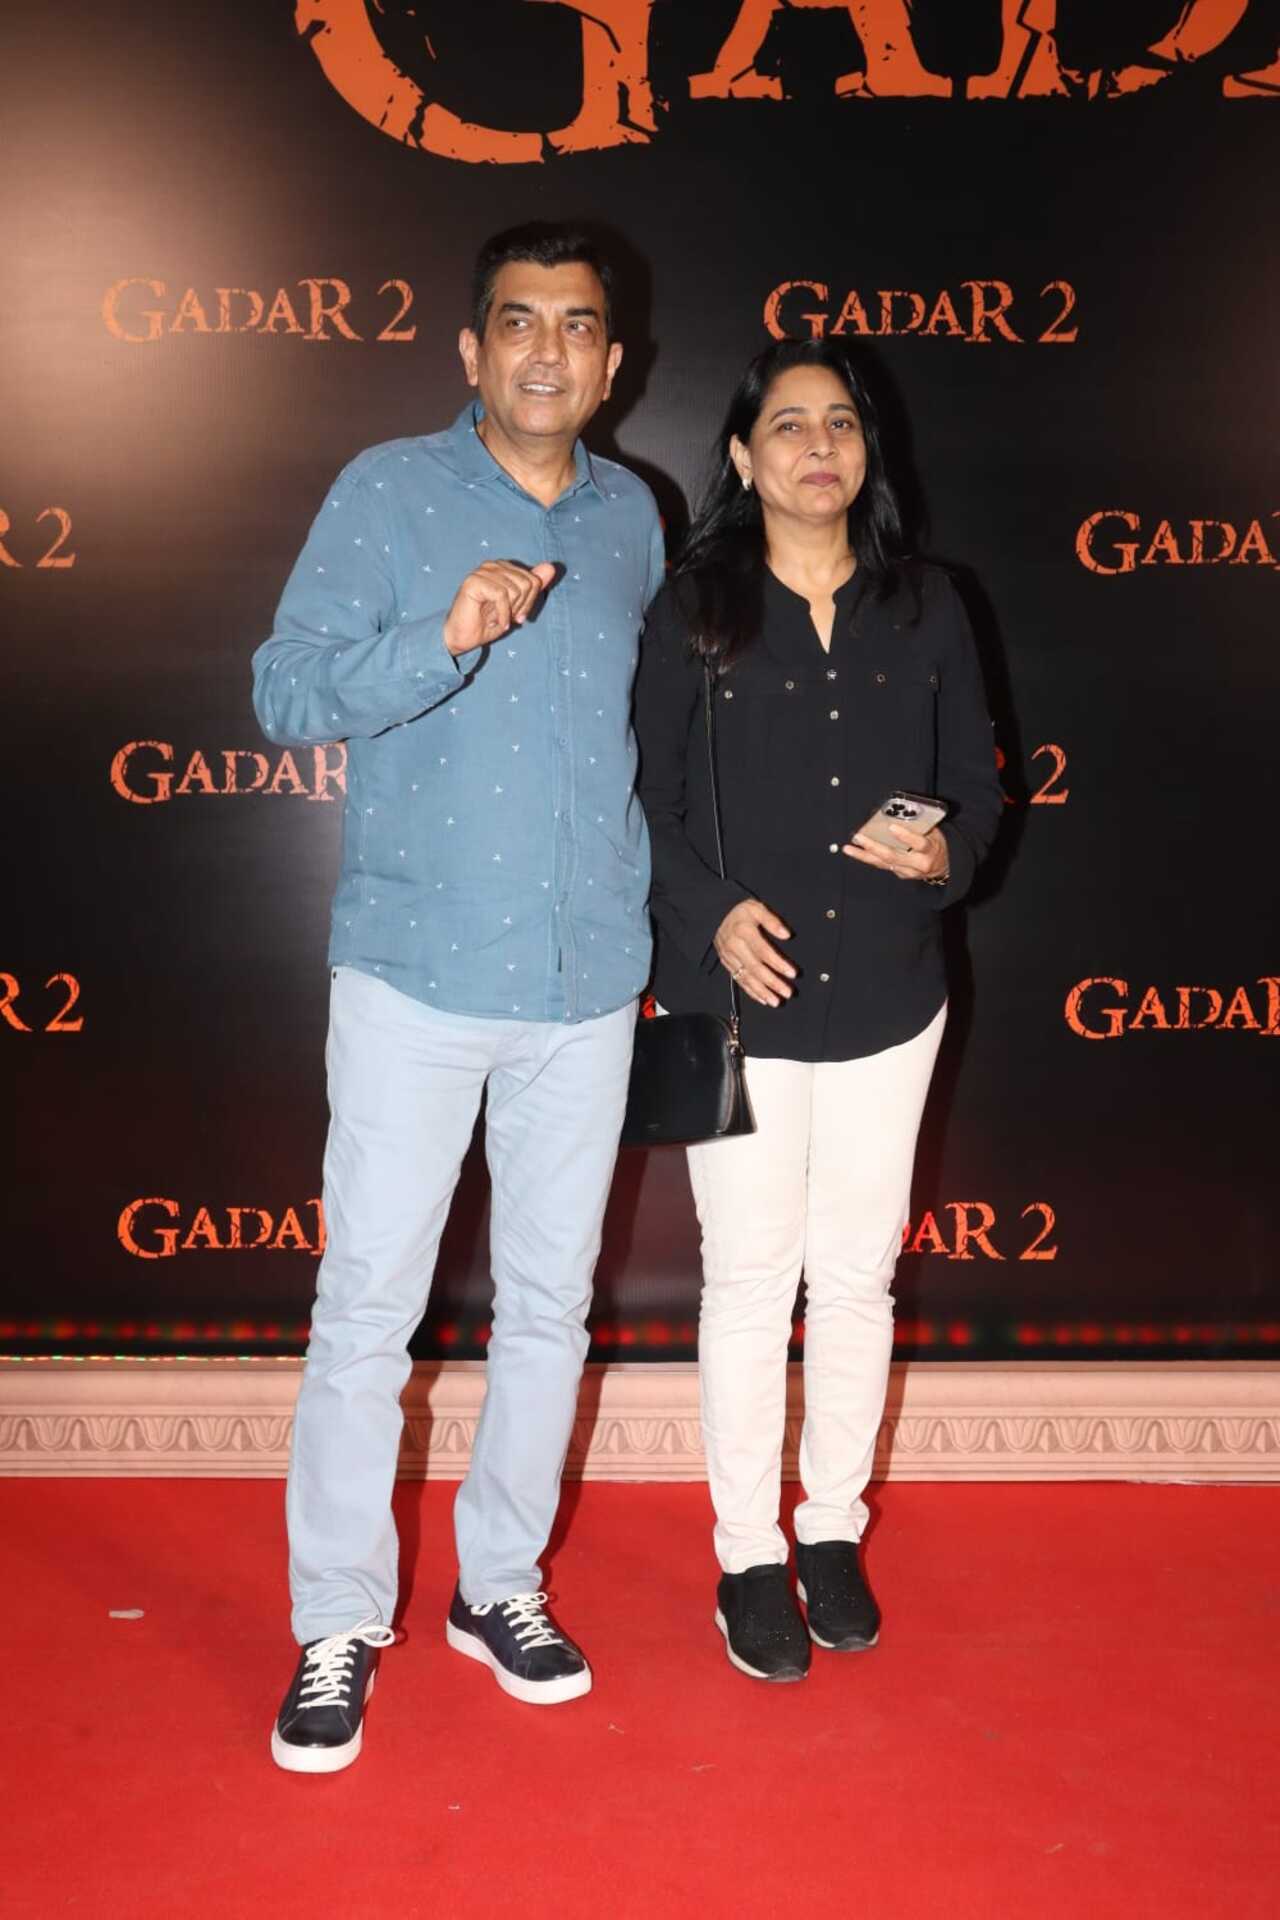 Chef Sanjeev Kapoor at the screening with his wife